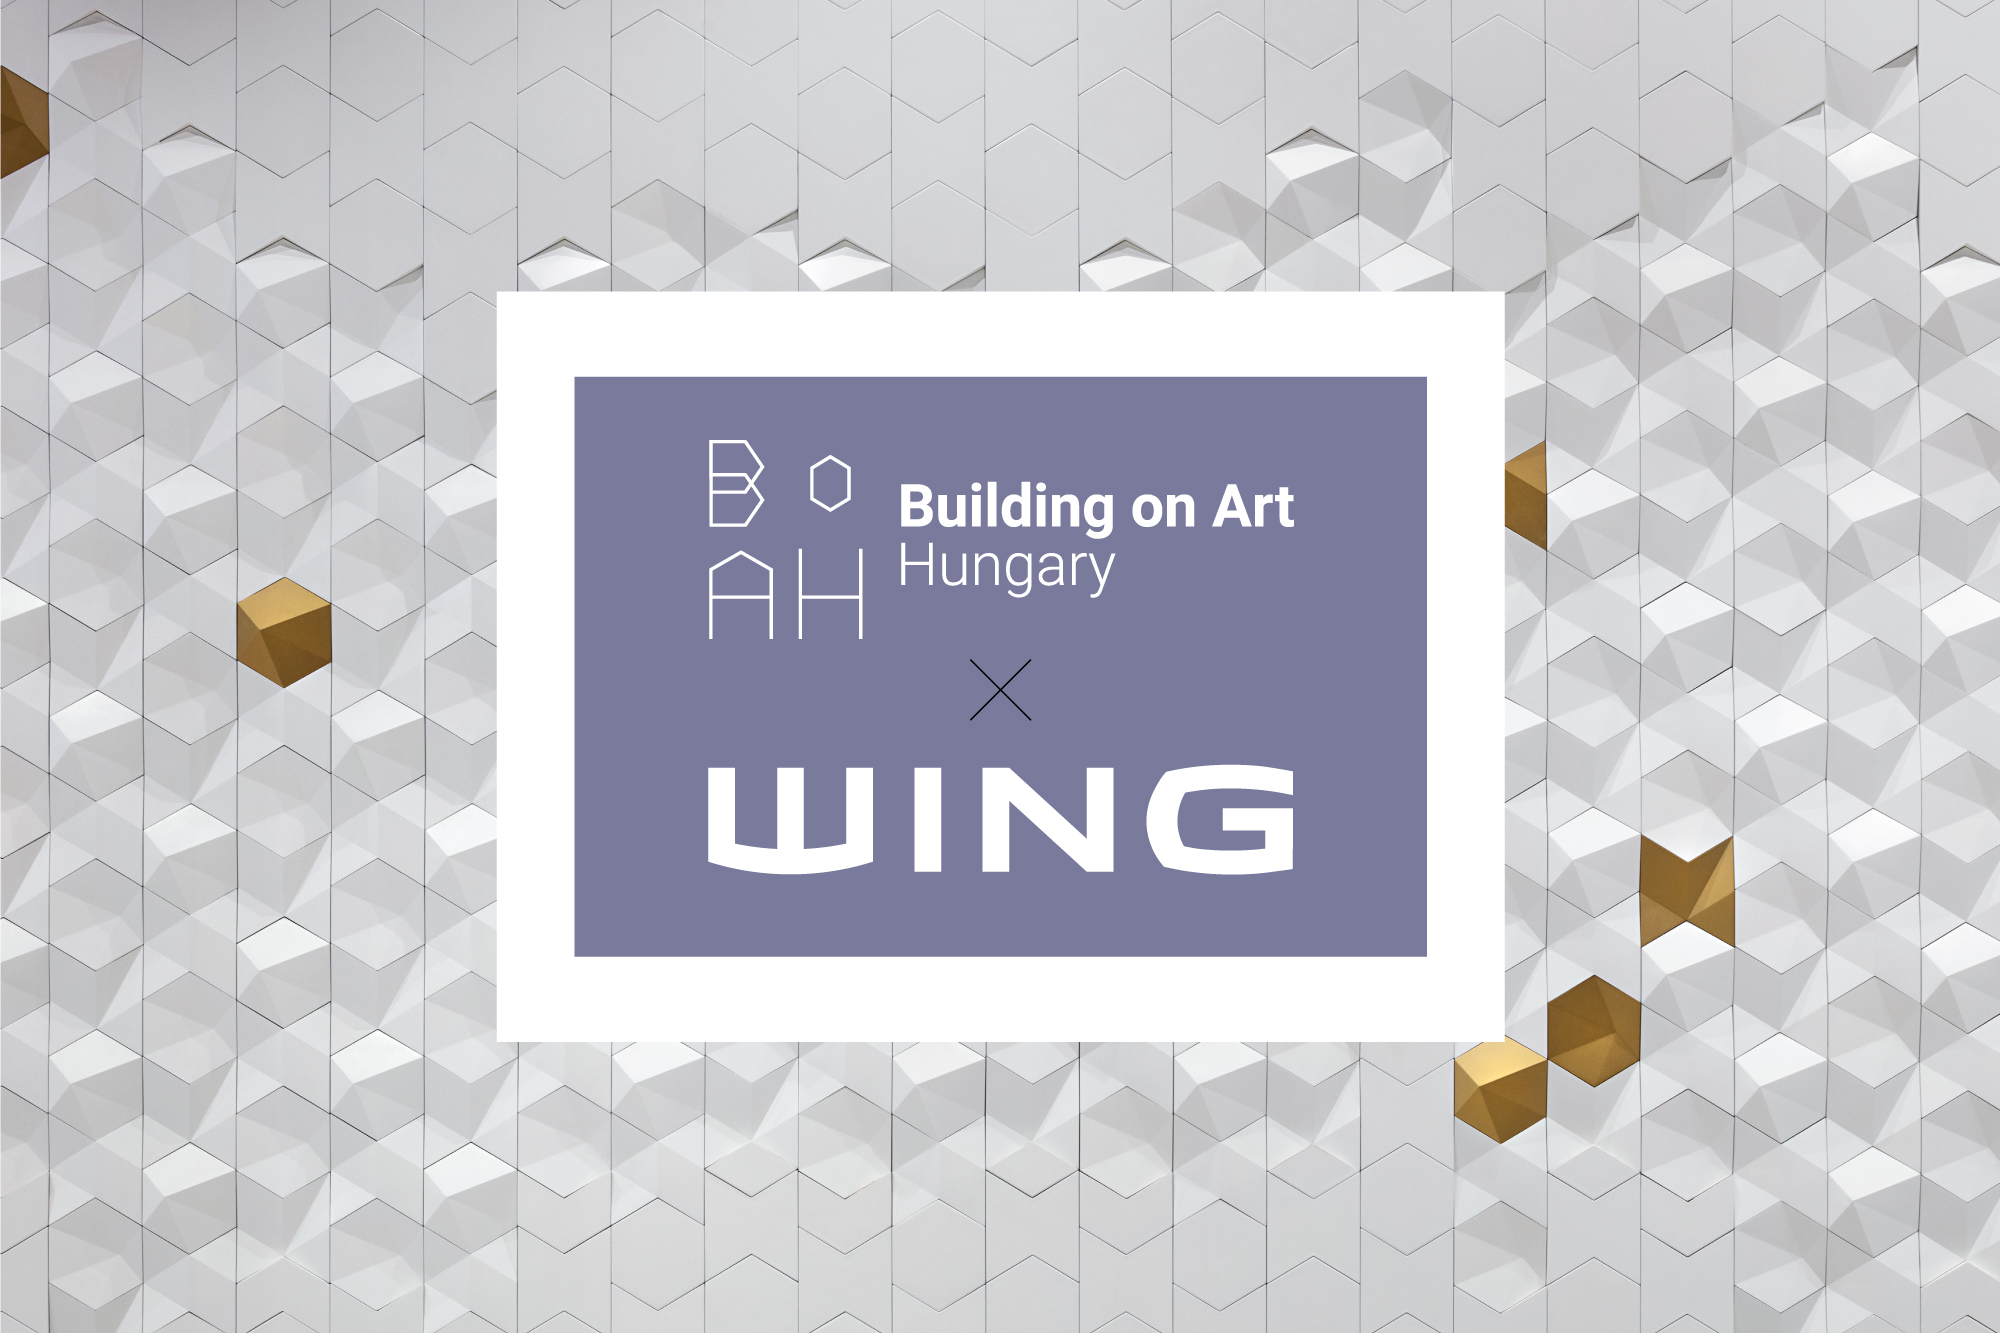 Building on Art program launched